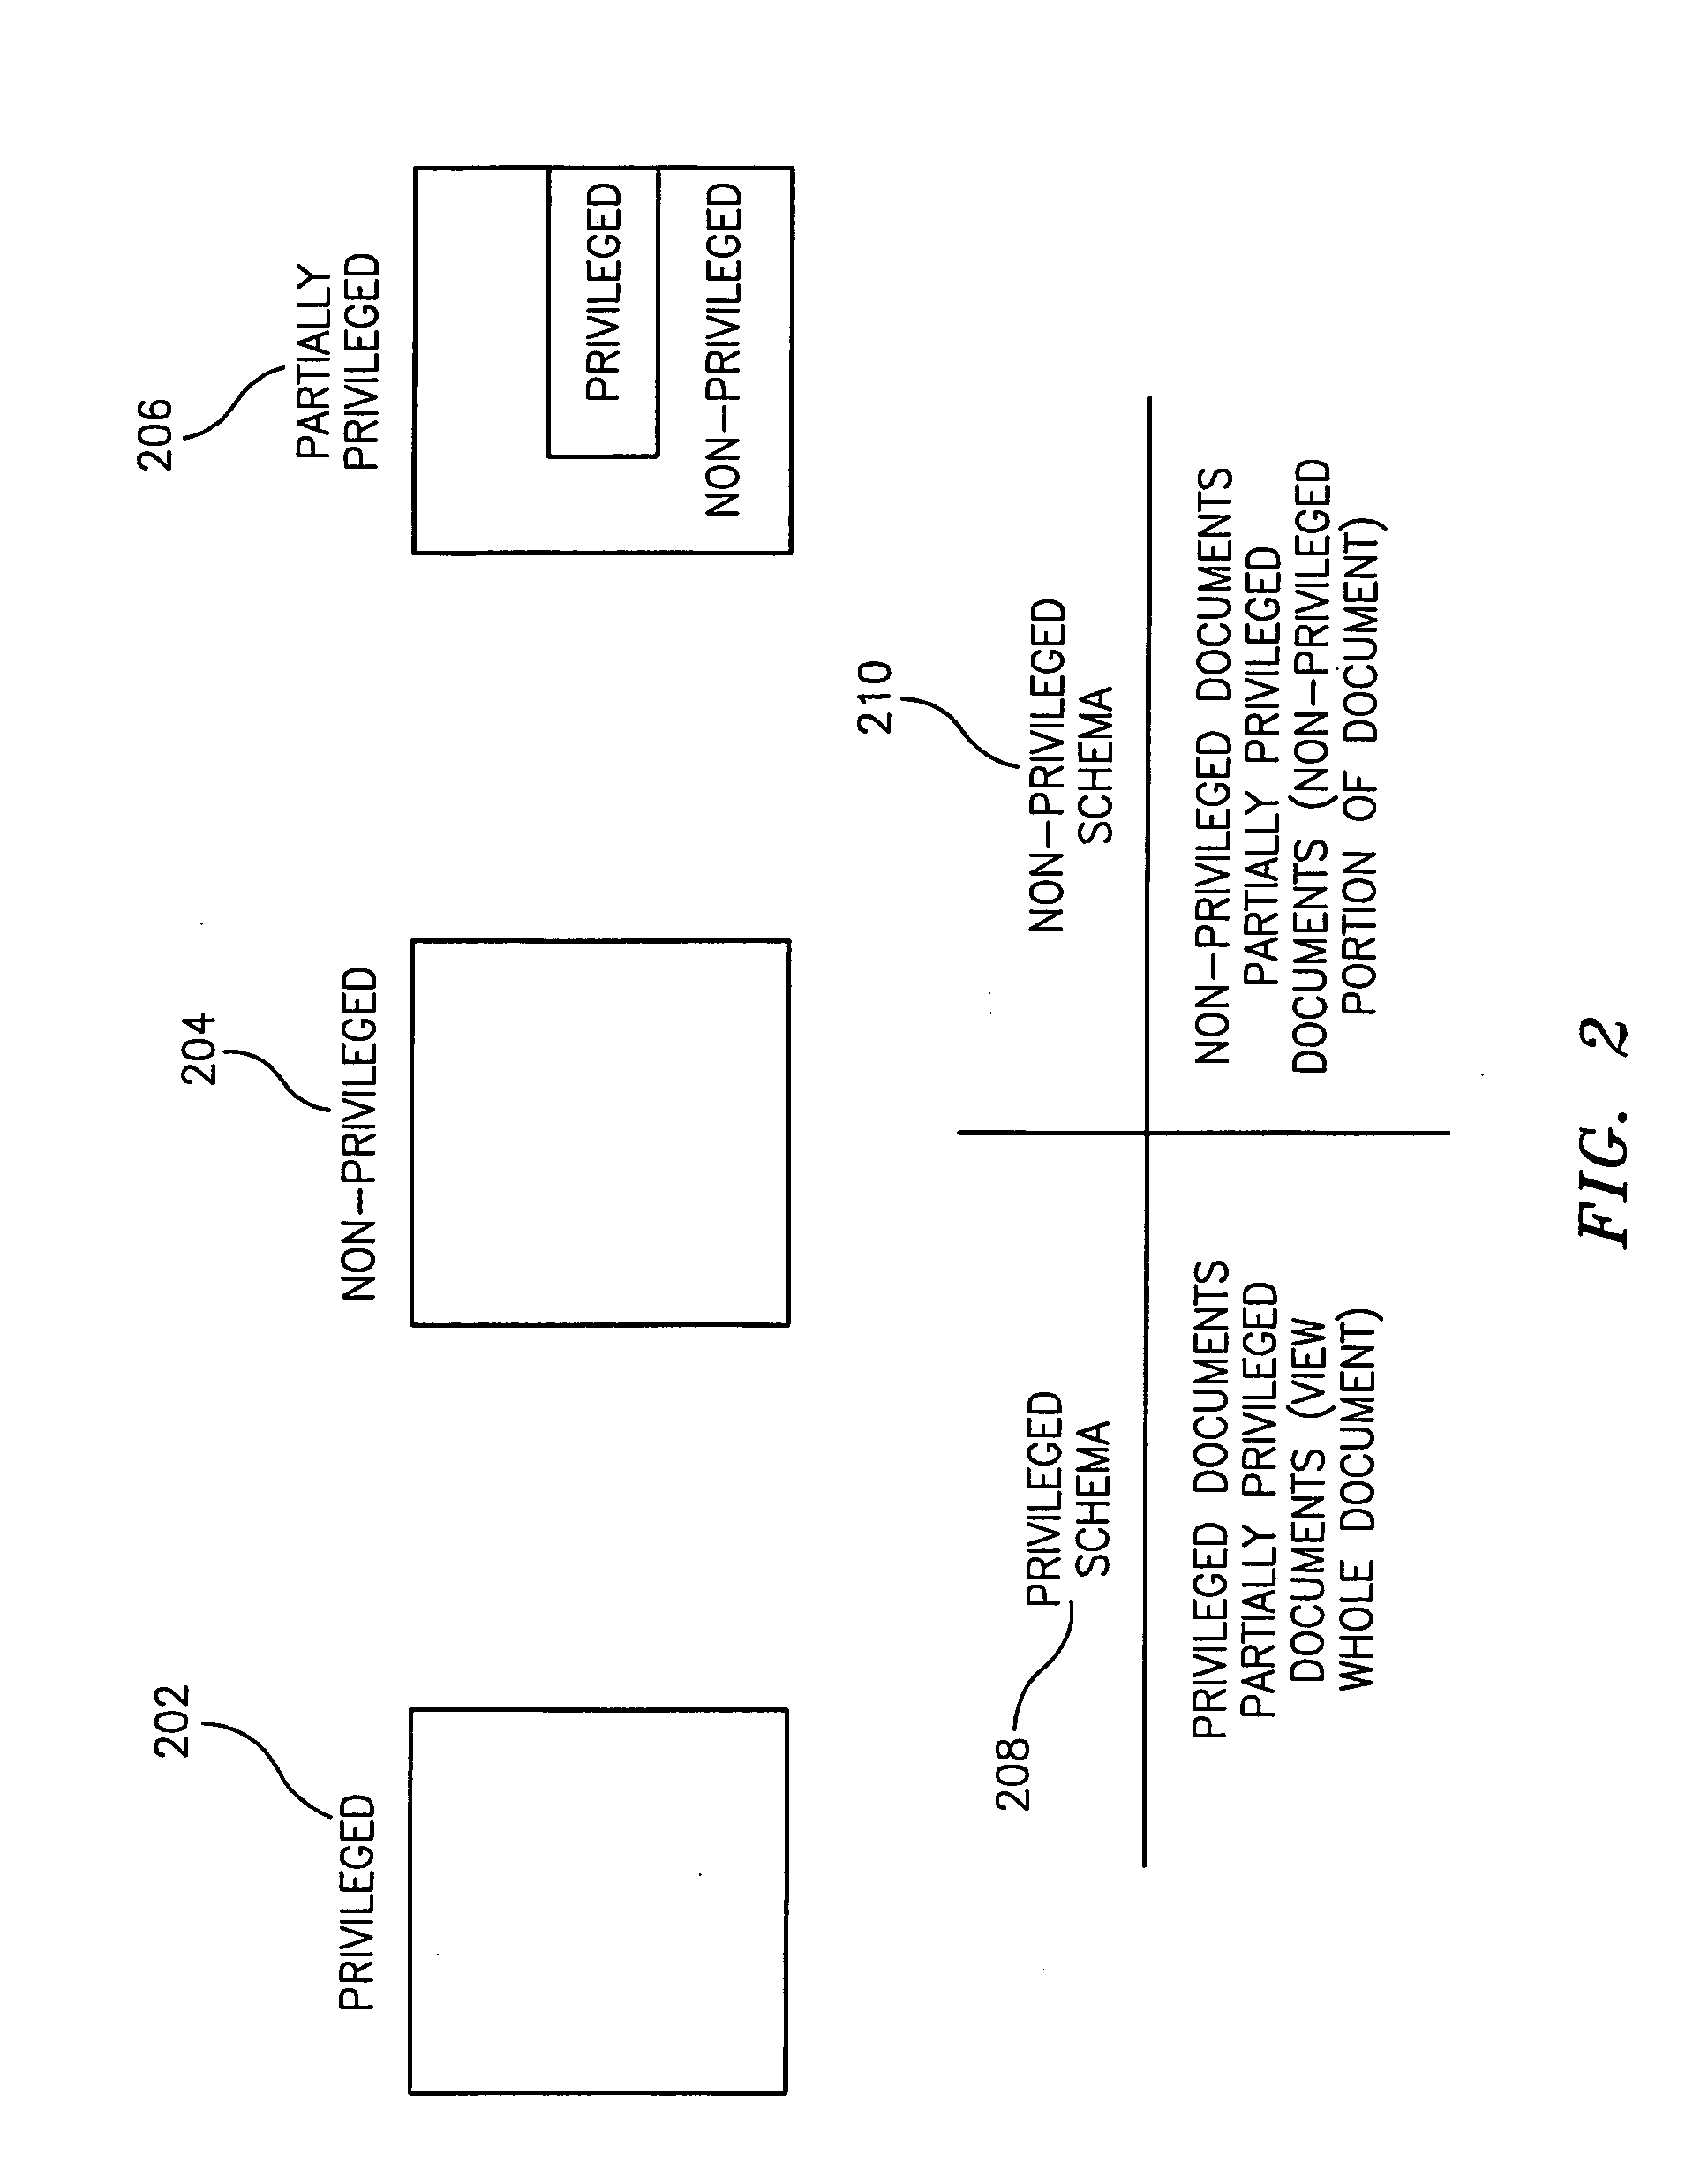 System and method for electronically managing privileged and non-privileged documents